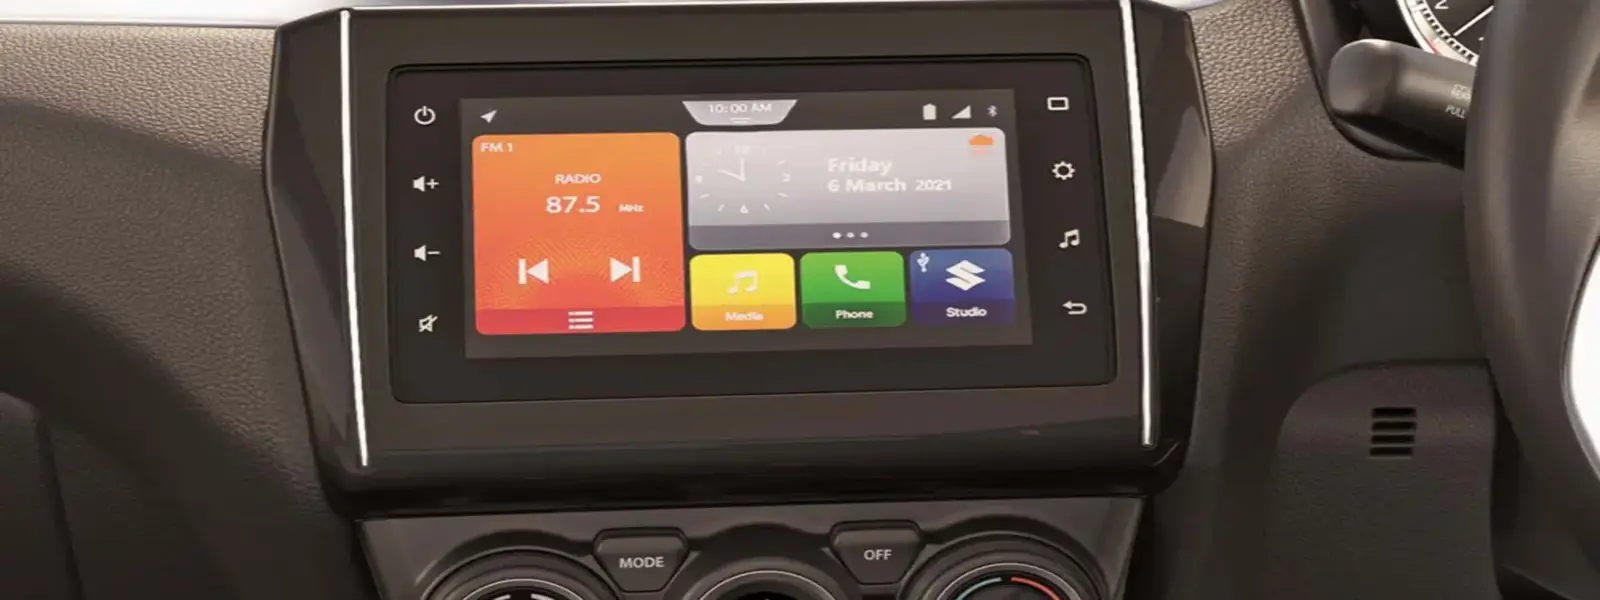 Swift- SmartPlay Infotainment System Sumitra DS Roza Bypass, Shajahanpur